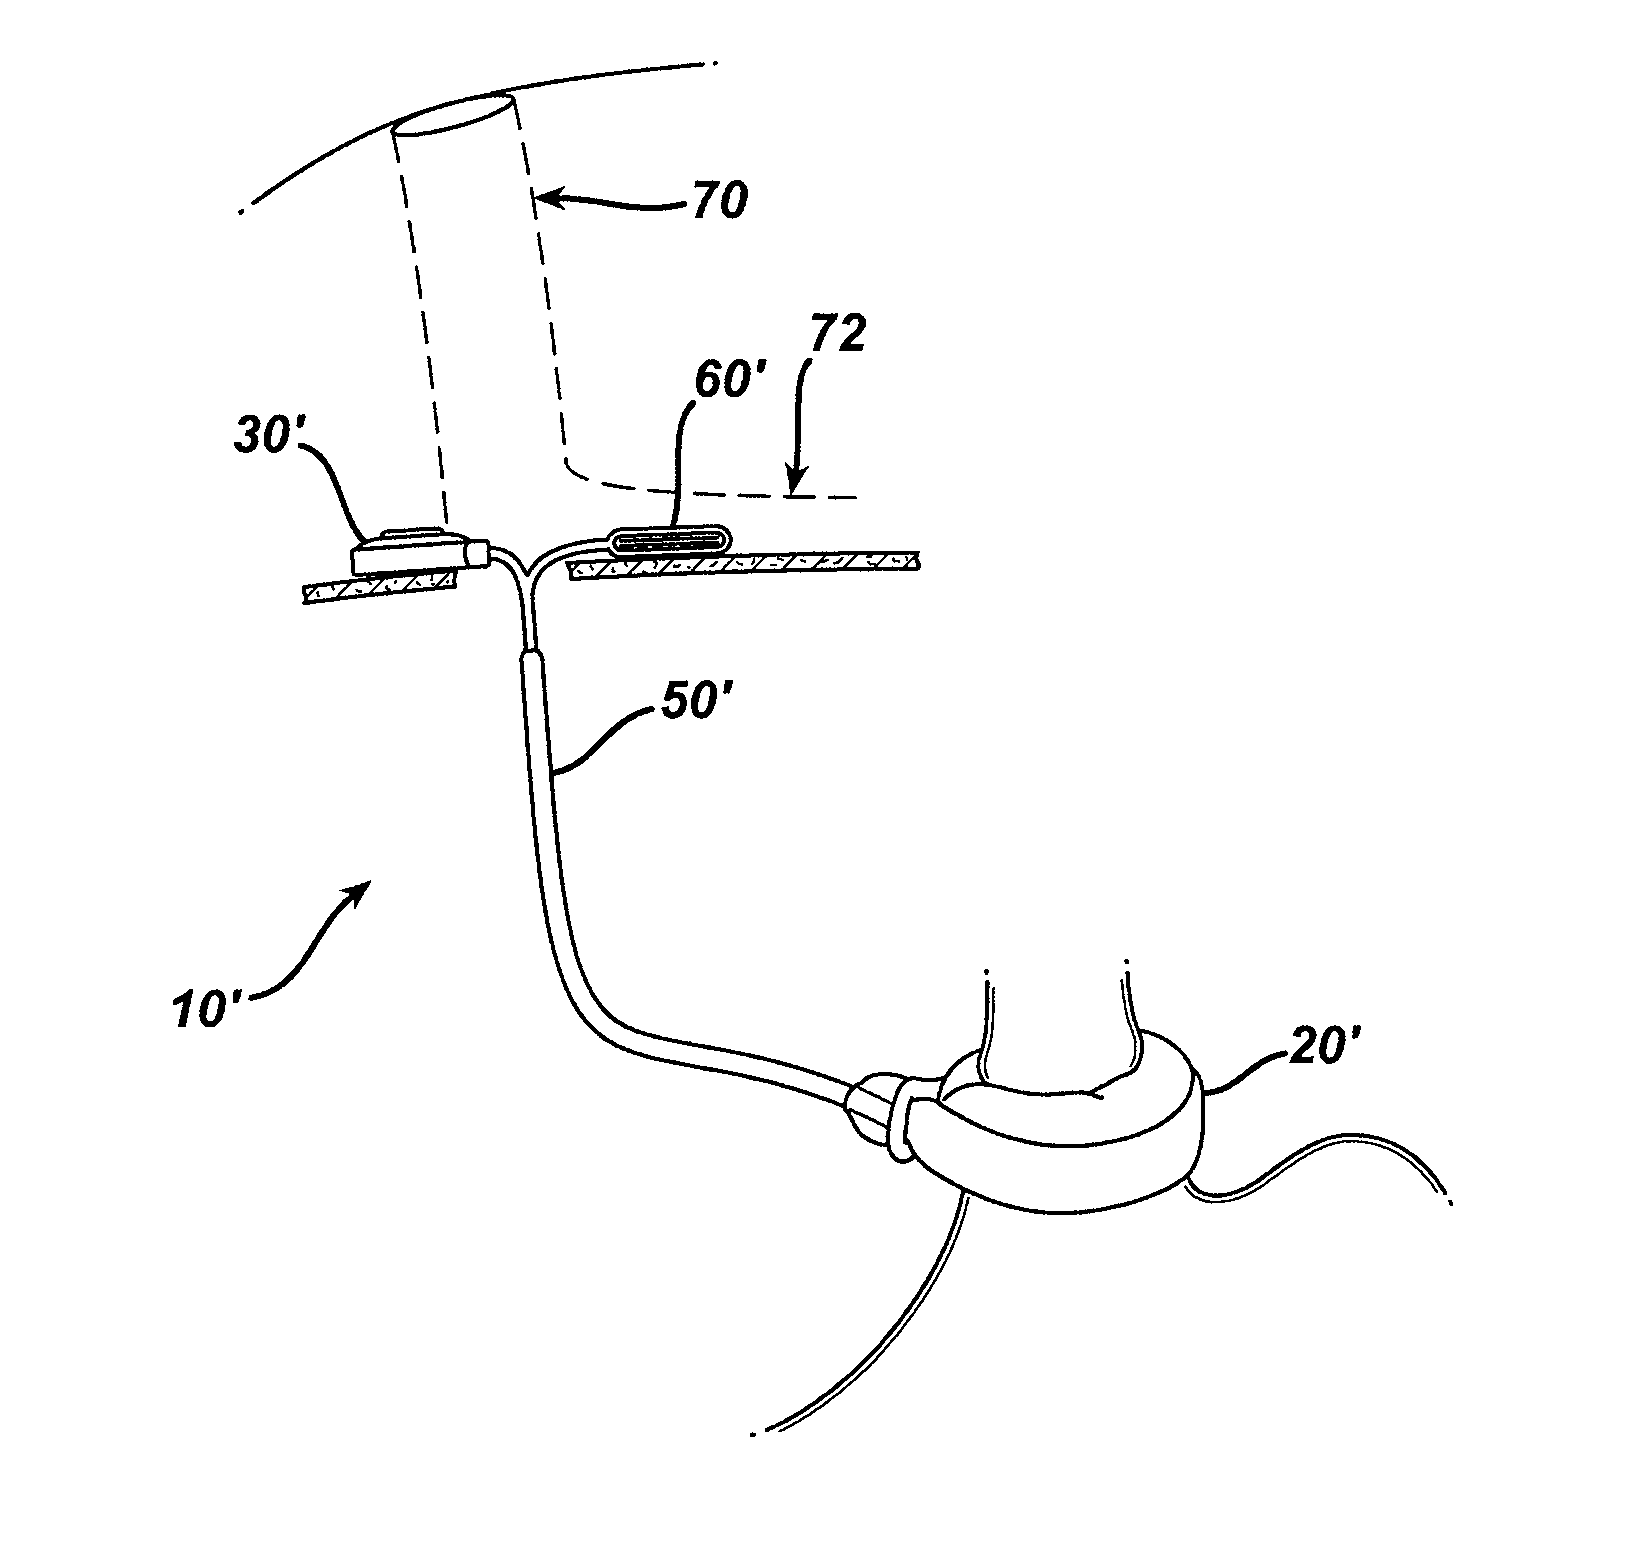 Methods for implanting a gastric restriction device